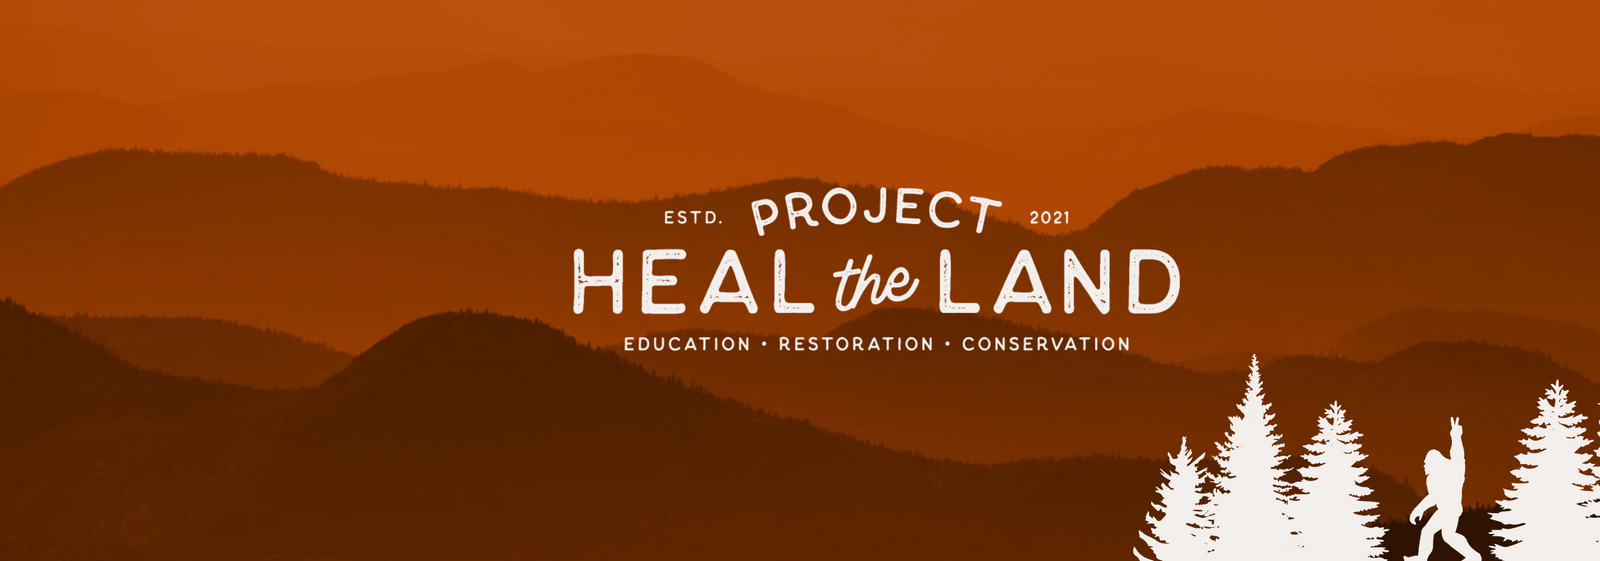 Mission - Project Heal The Land